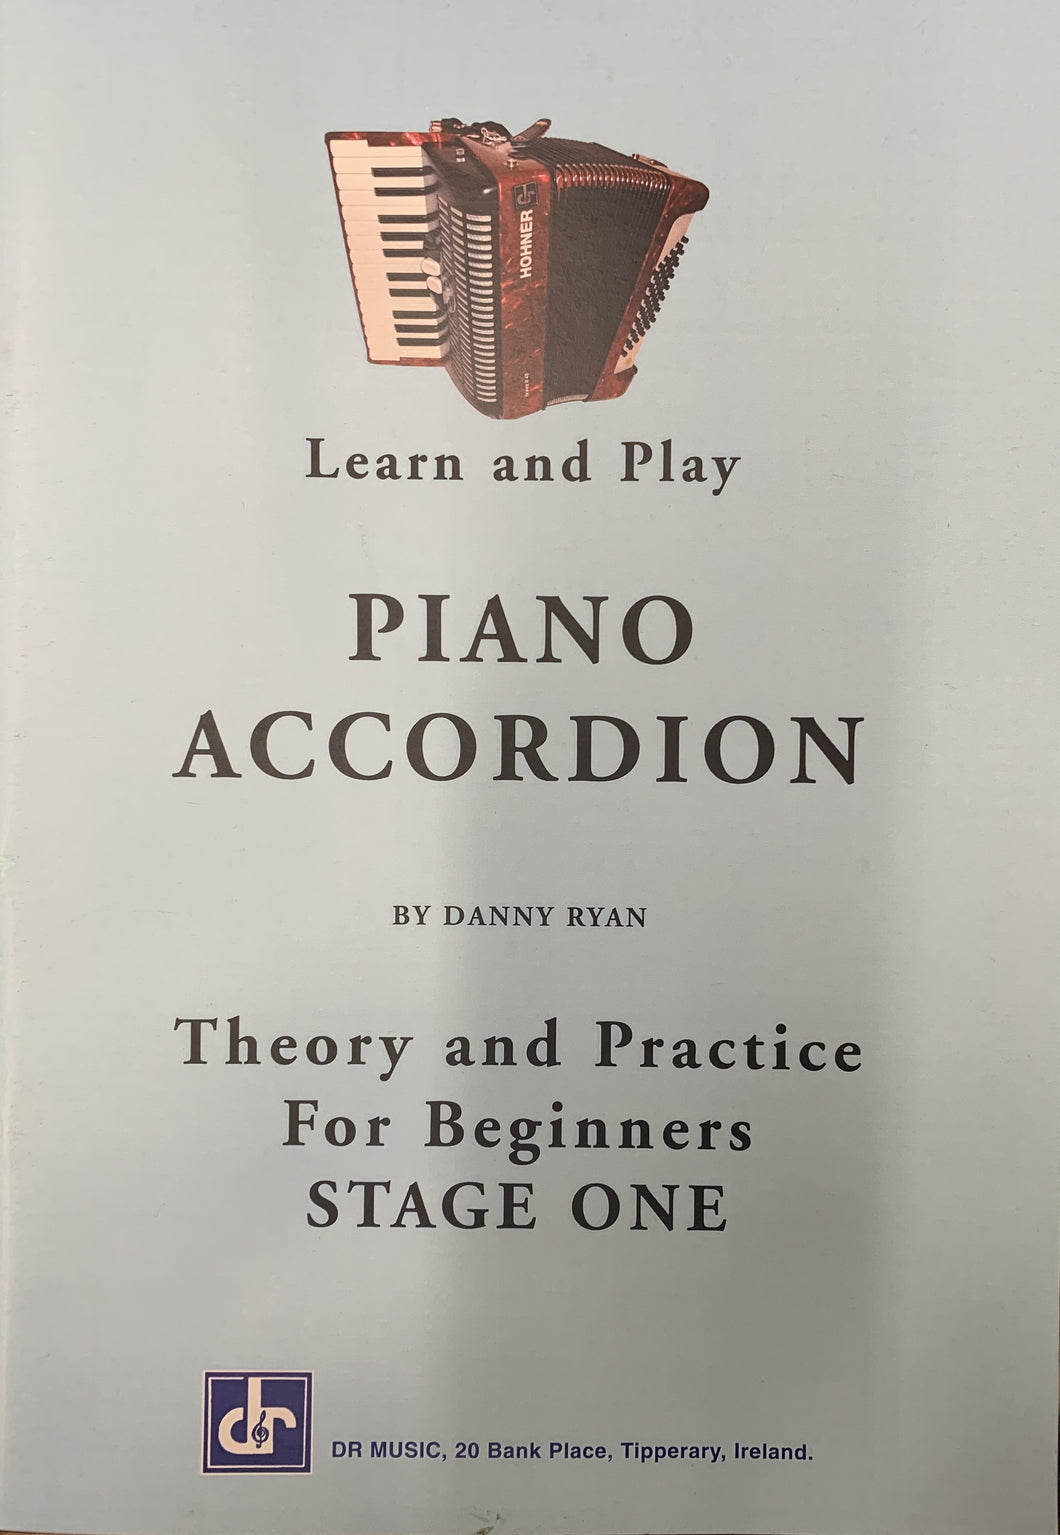 Piano Accordion Learn and Play, Theory and Practice for Beginners Stage one